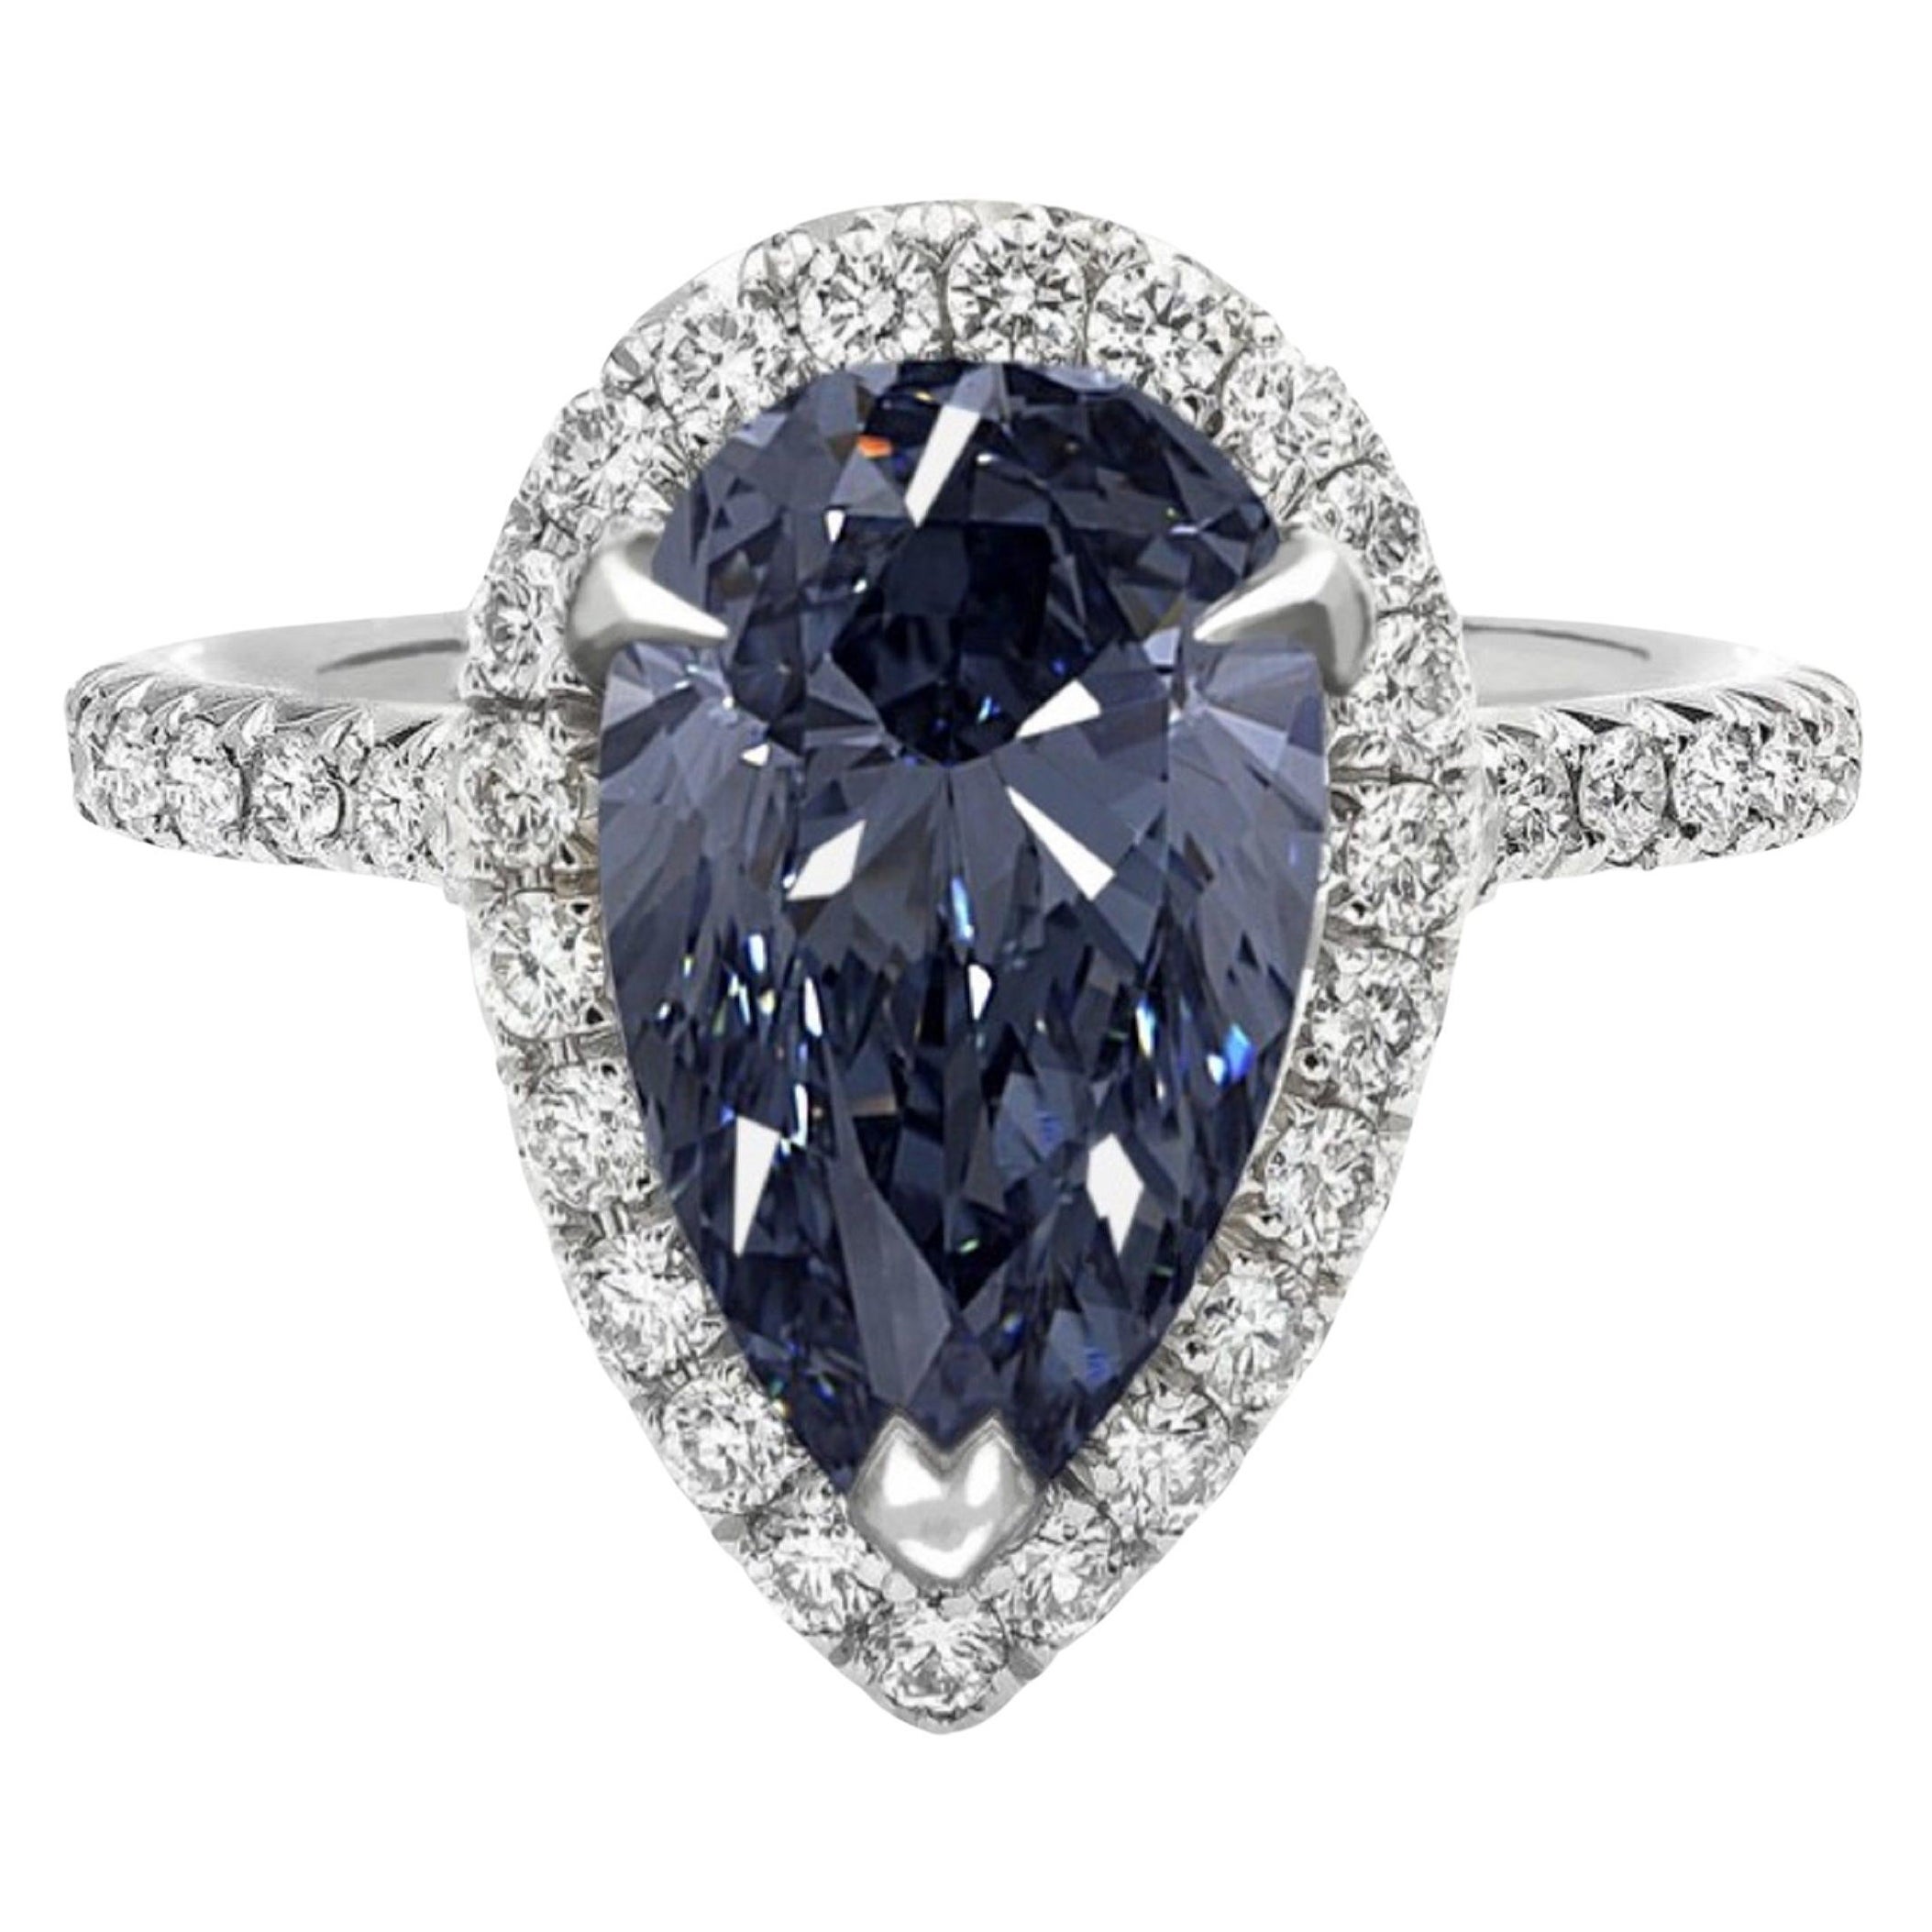 Exceptional GIA Certified 1 Carat Fancy Intense Blue Diamond Ring